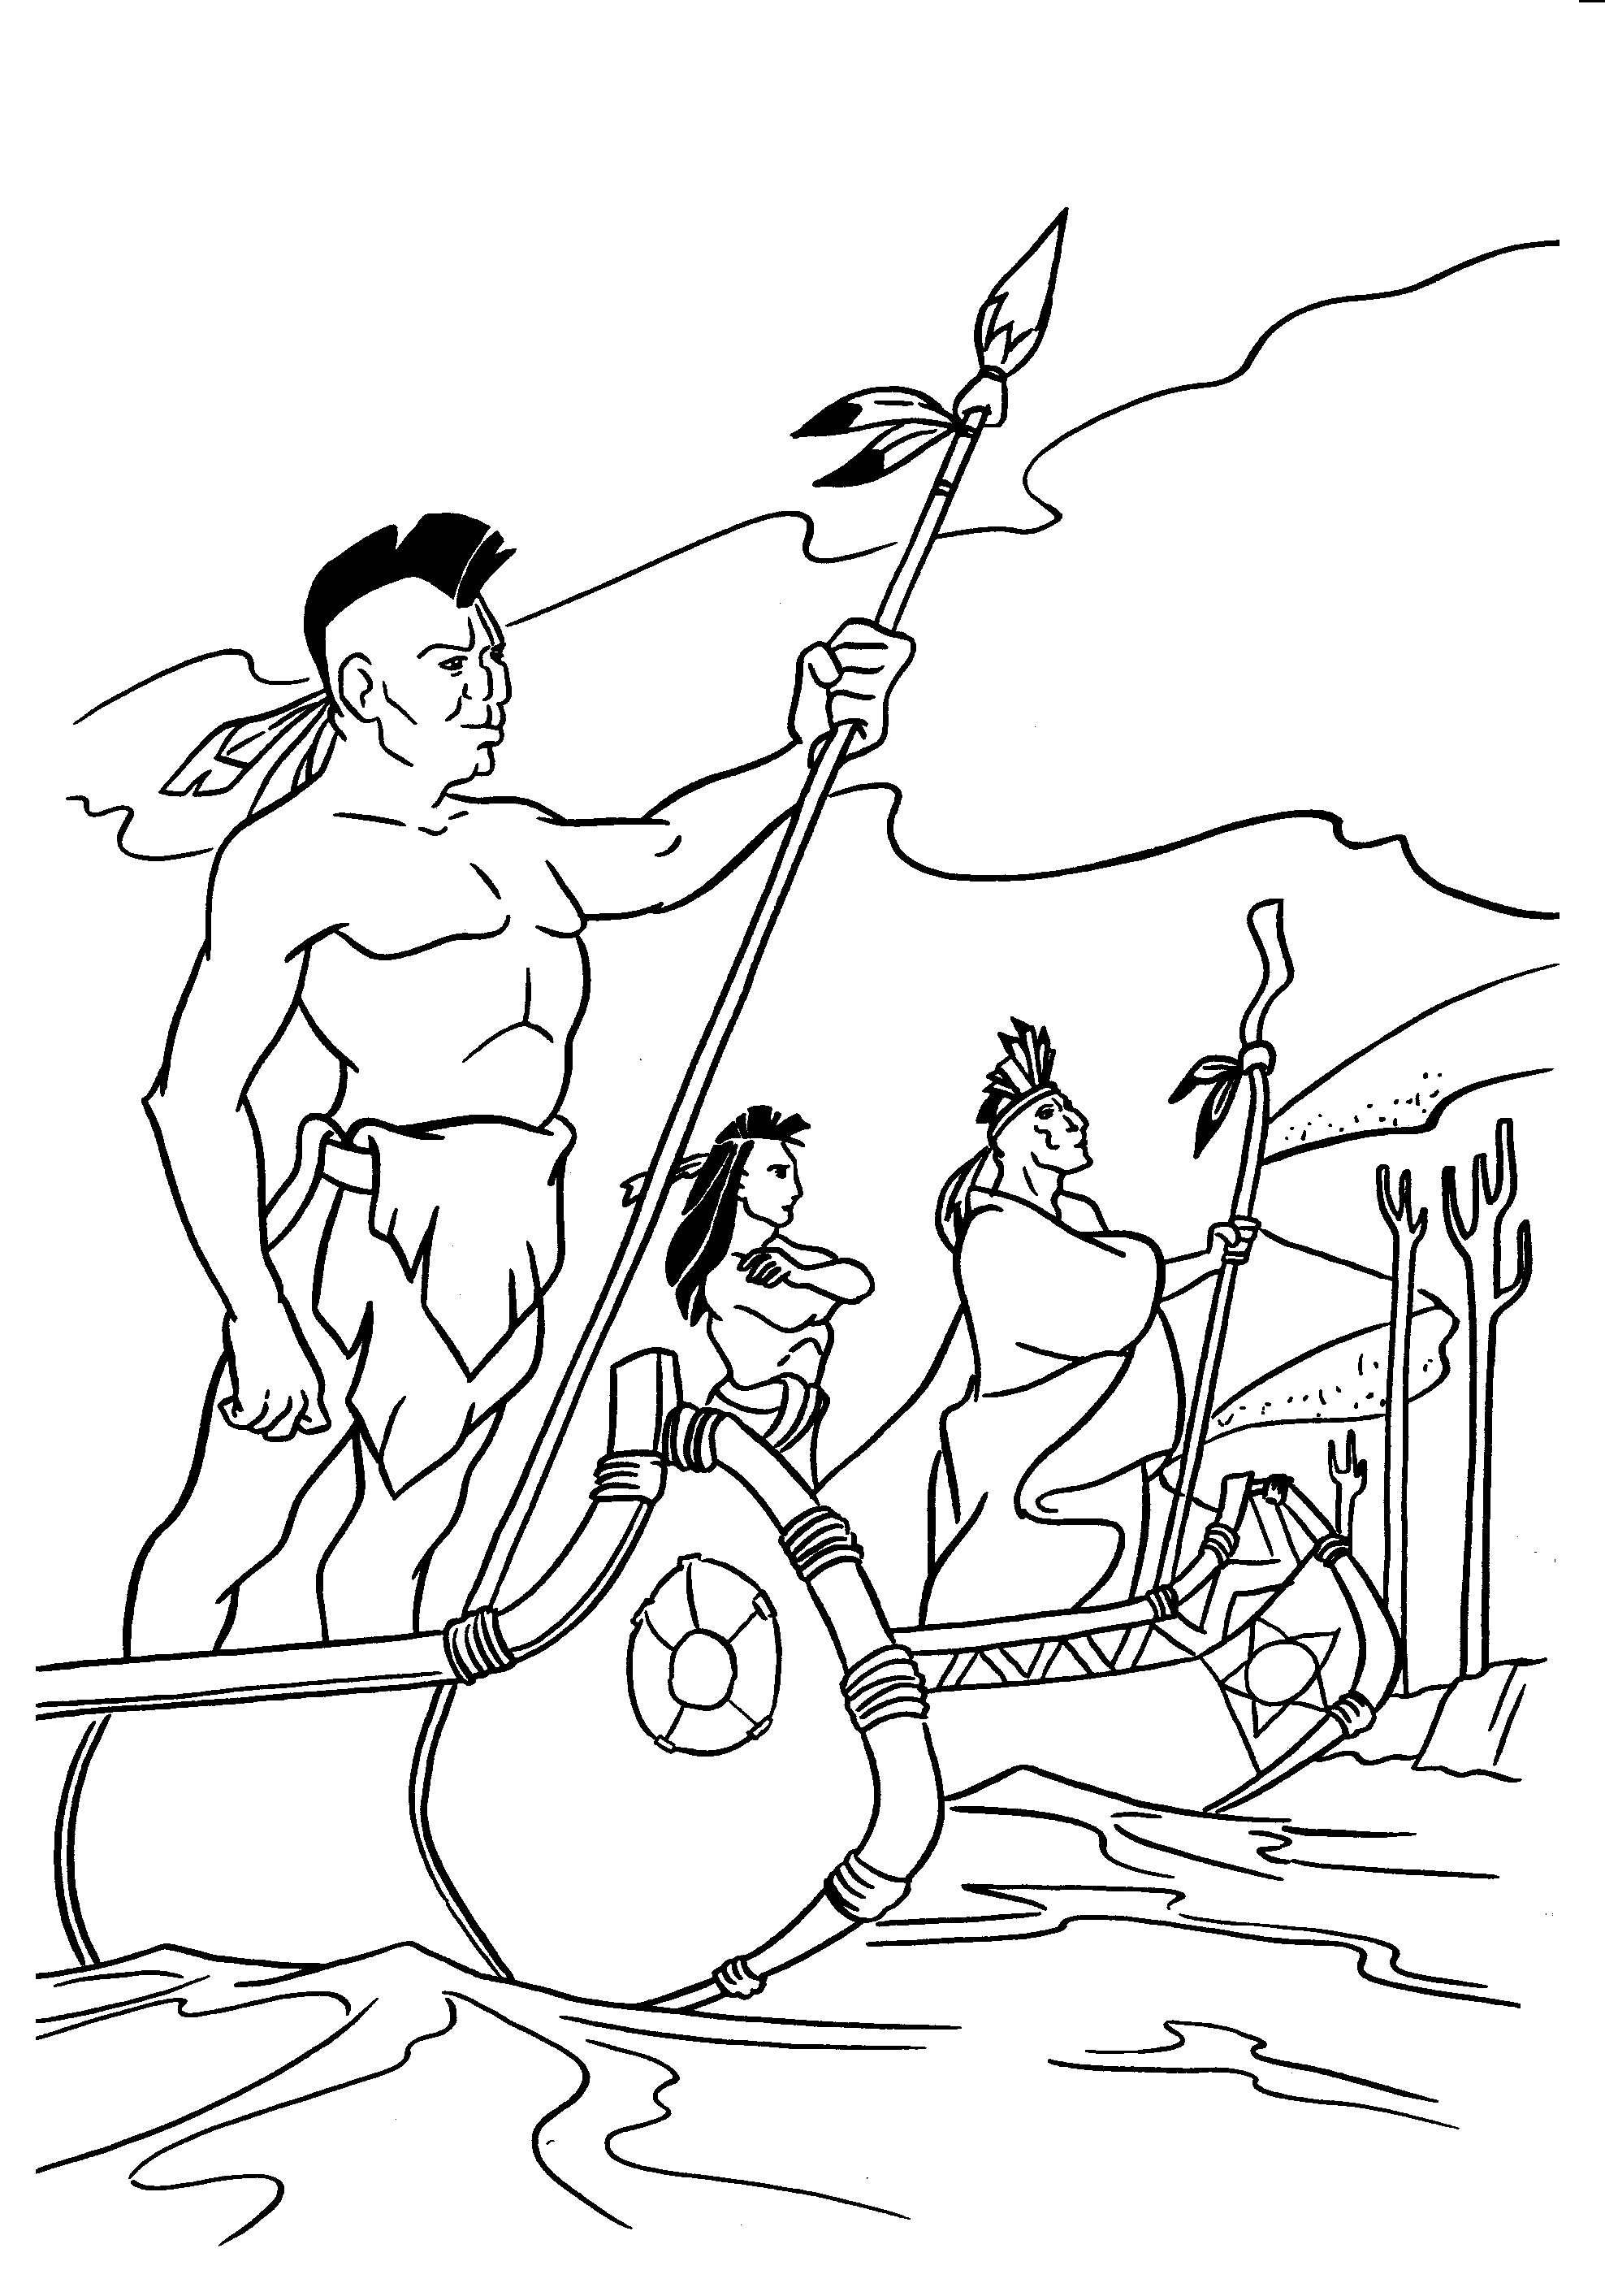 Native American Coloring Pages For Preschoolers   Coloring Home